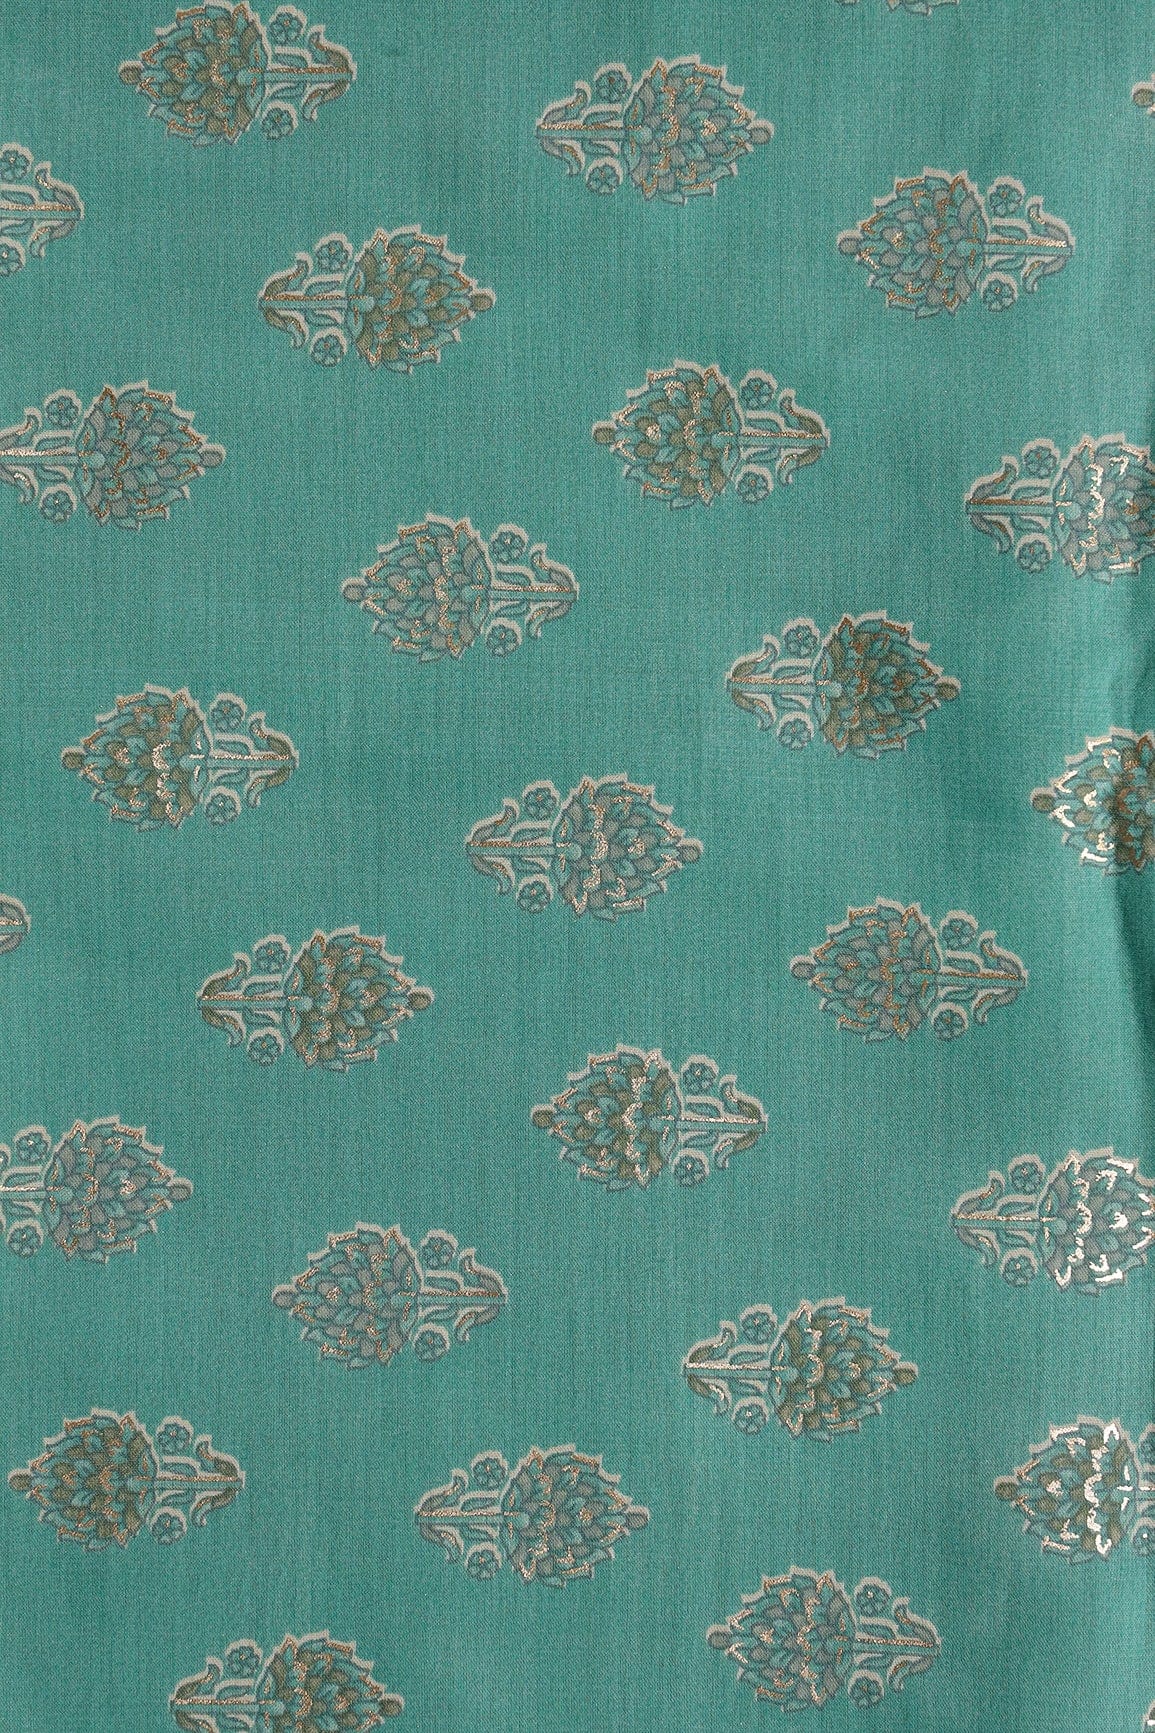 doeraa Prints Teal And Olive Floral Foil Print On Viscose Chanderi Silk Fabric